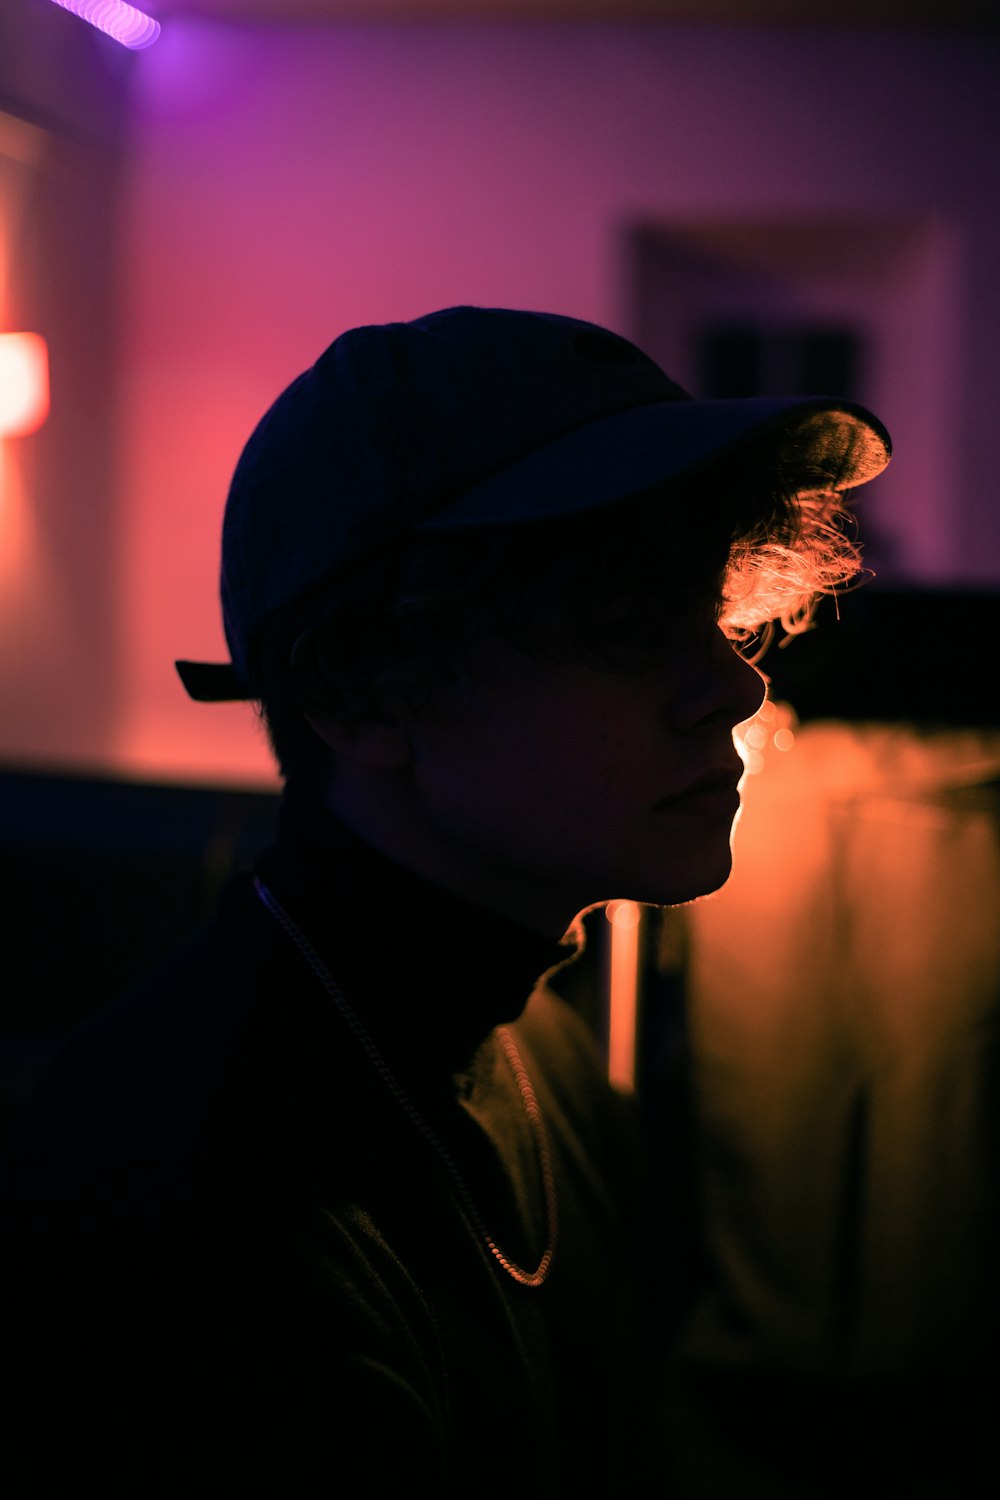 a person wearing a hat in a dark room